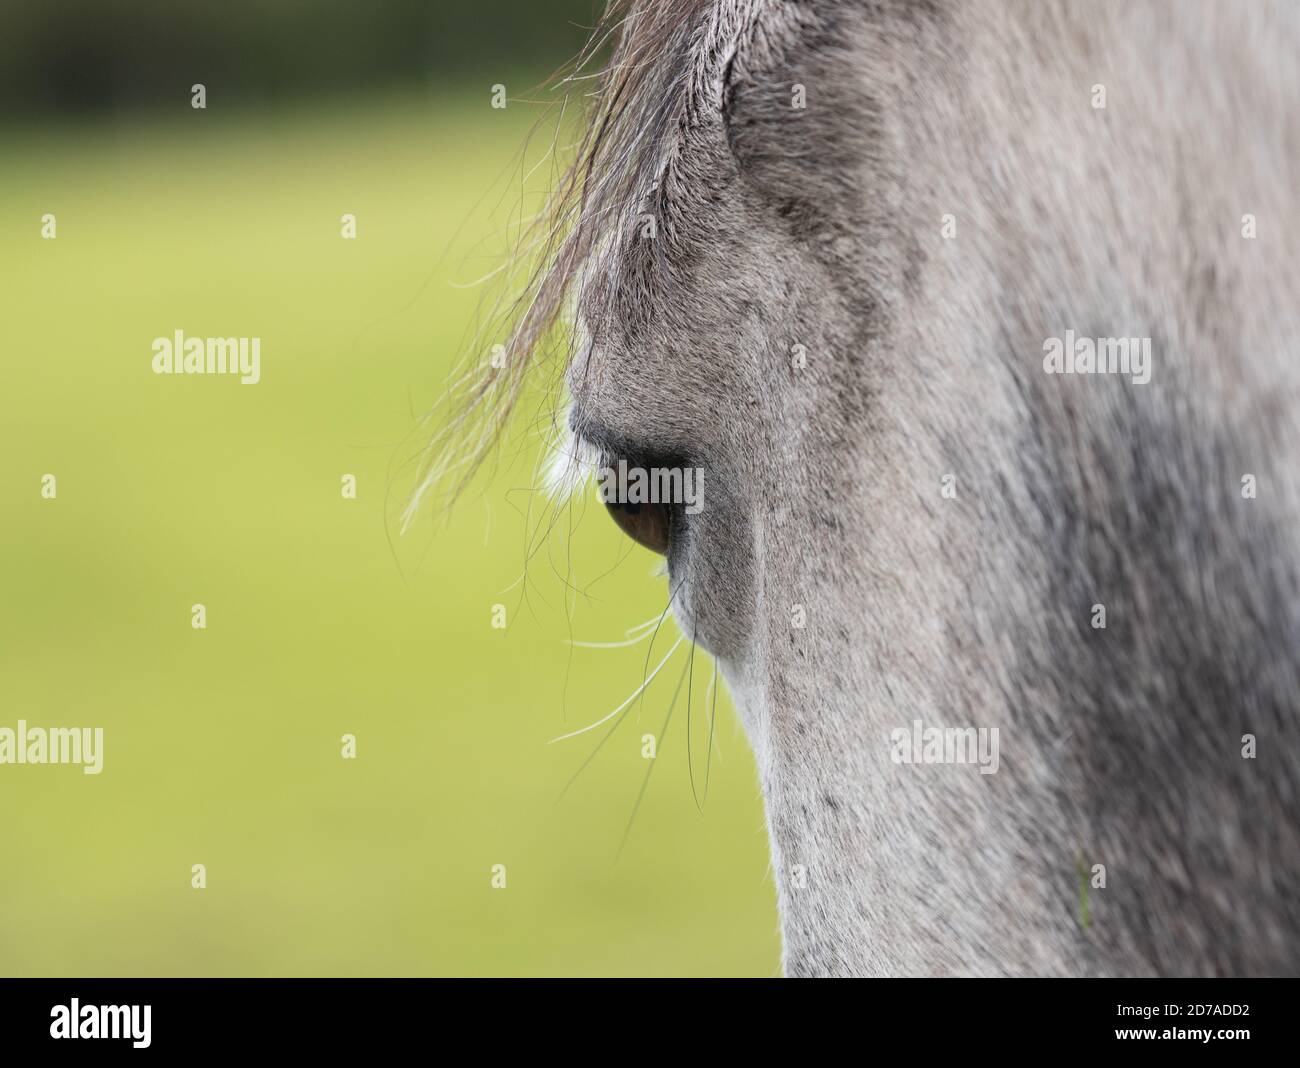 Close up of an eye and head of a grey horse side view Stock Photo